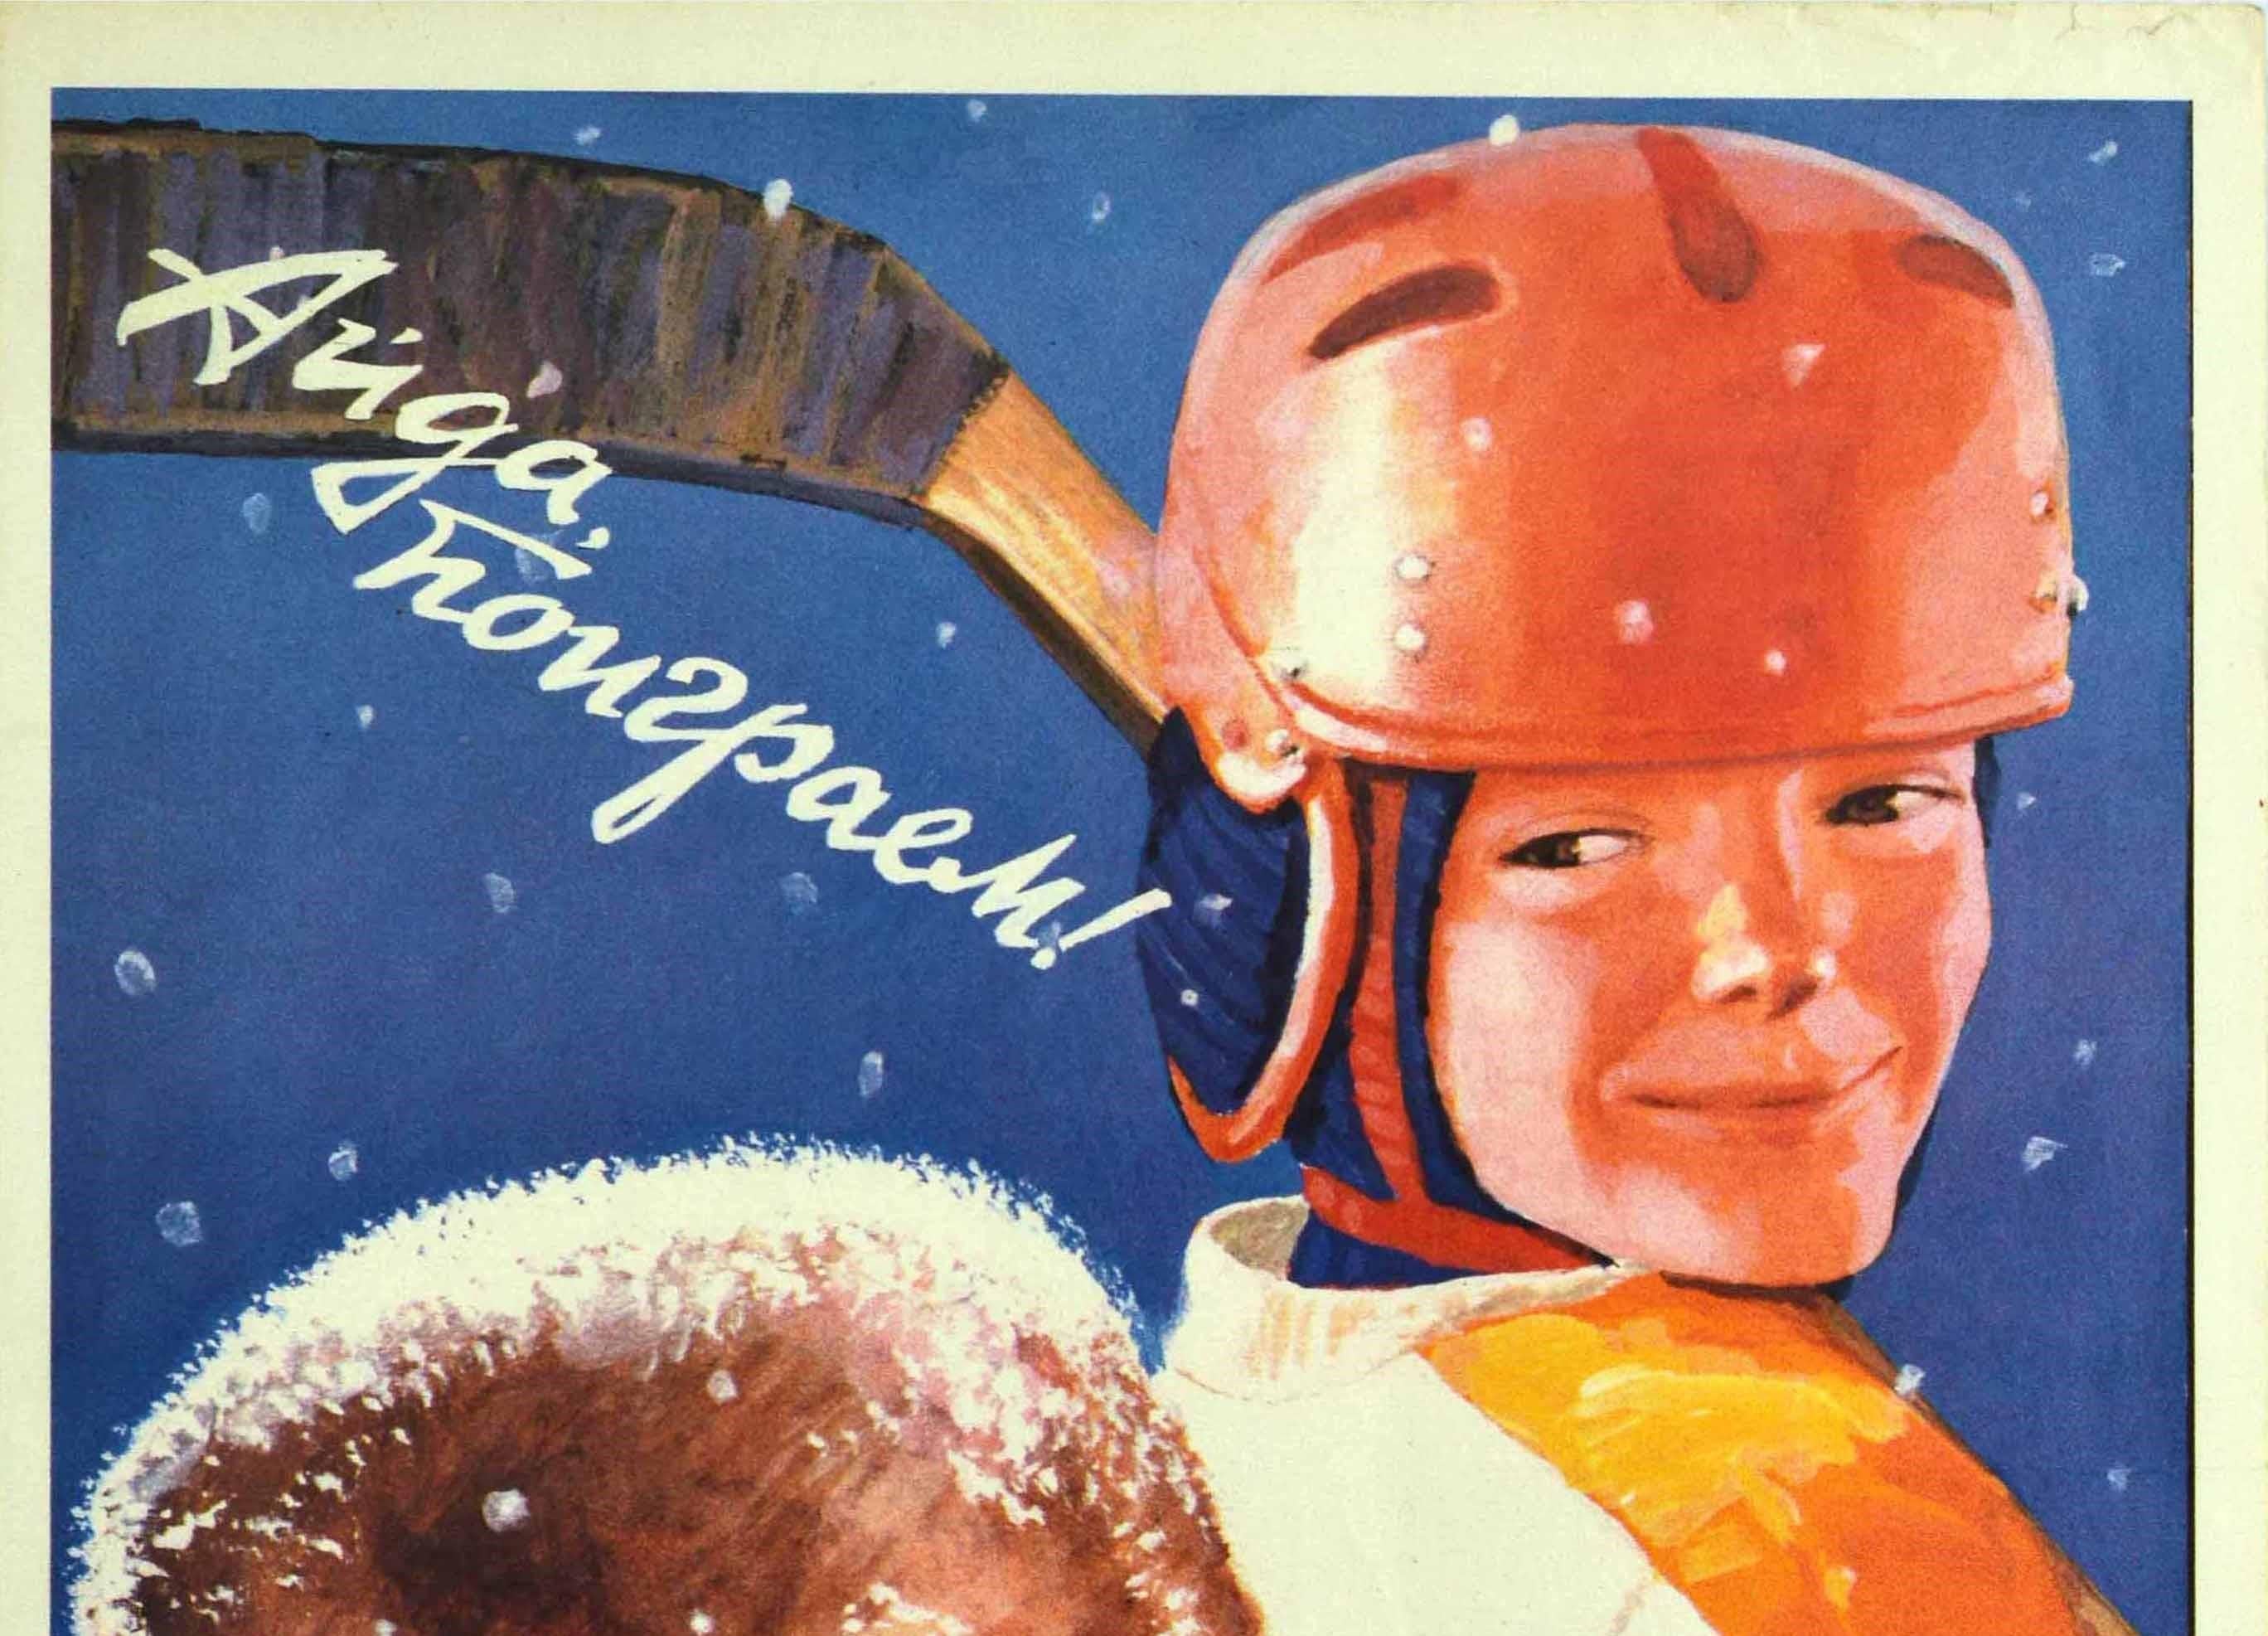 Original vintage Soviet sport propaganda poster - ????, ????????! / Let's go Play! - featuring a great illustration of a child in a traditional Russian winter ushanka fur hat and scarf masking their face to keep warm from the cold snow falling,